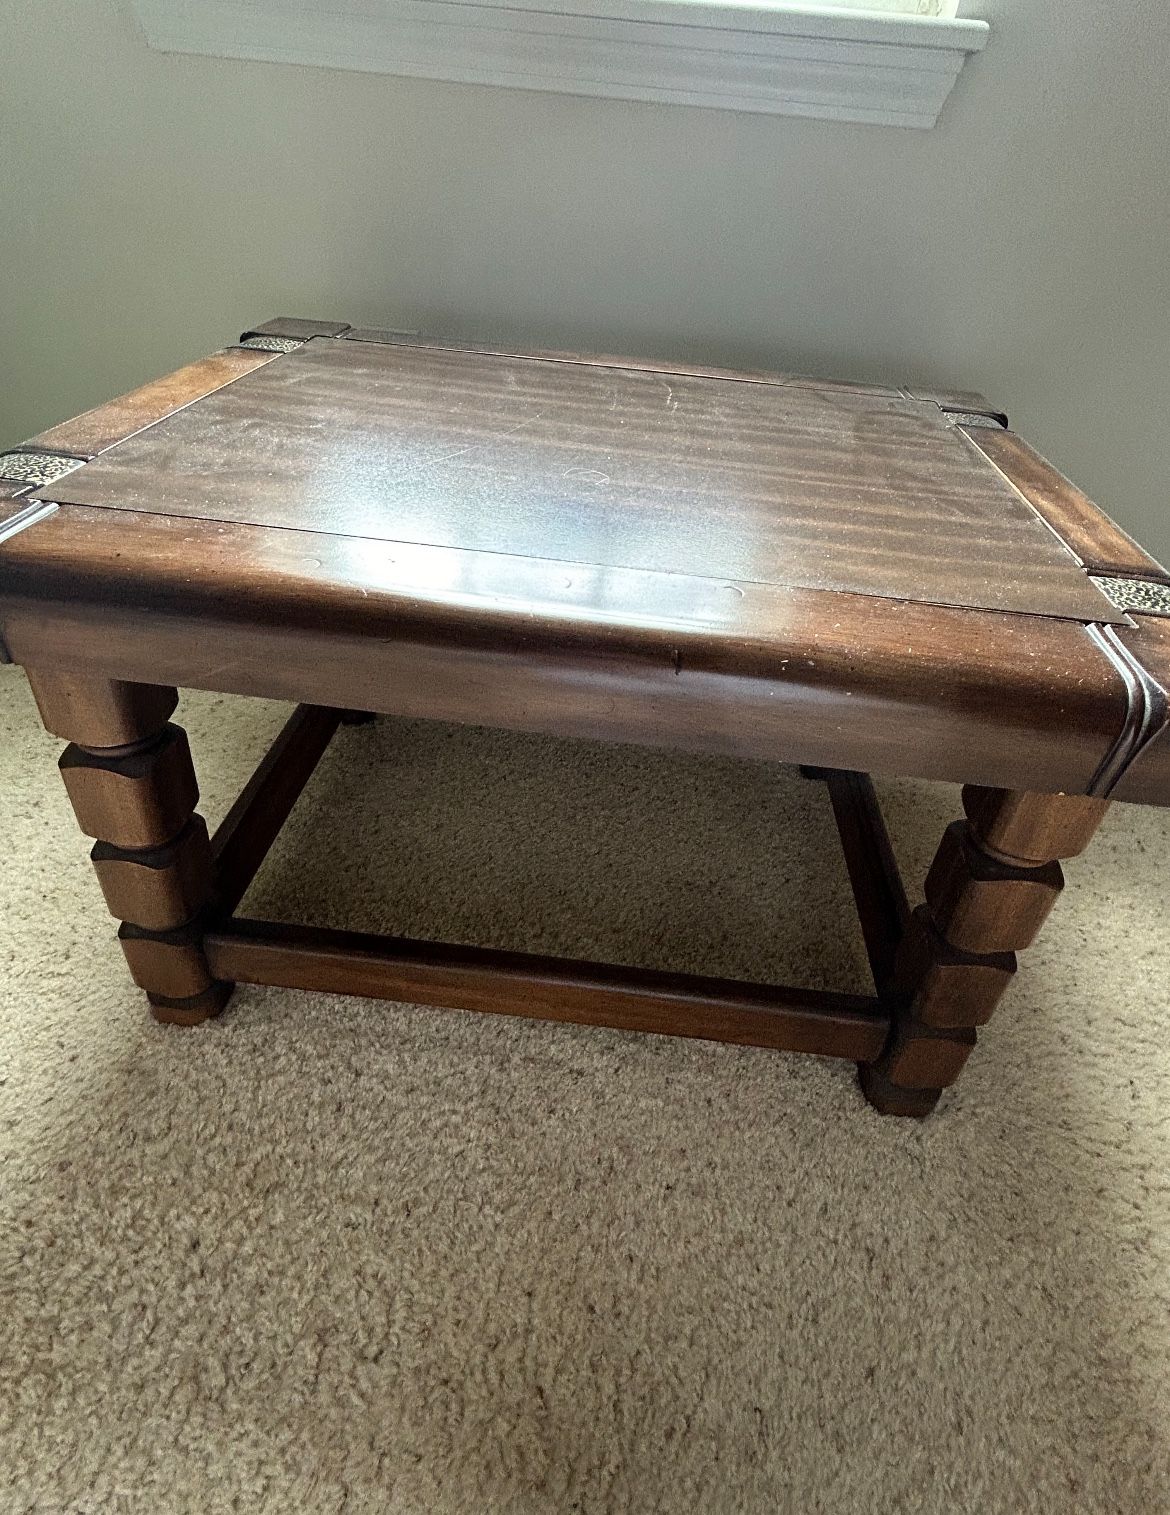 Square coffee or end table (30 in X 22 in)